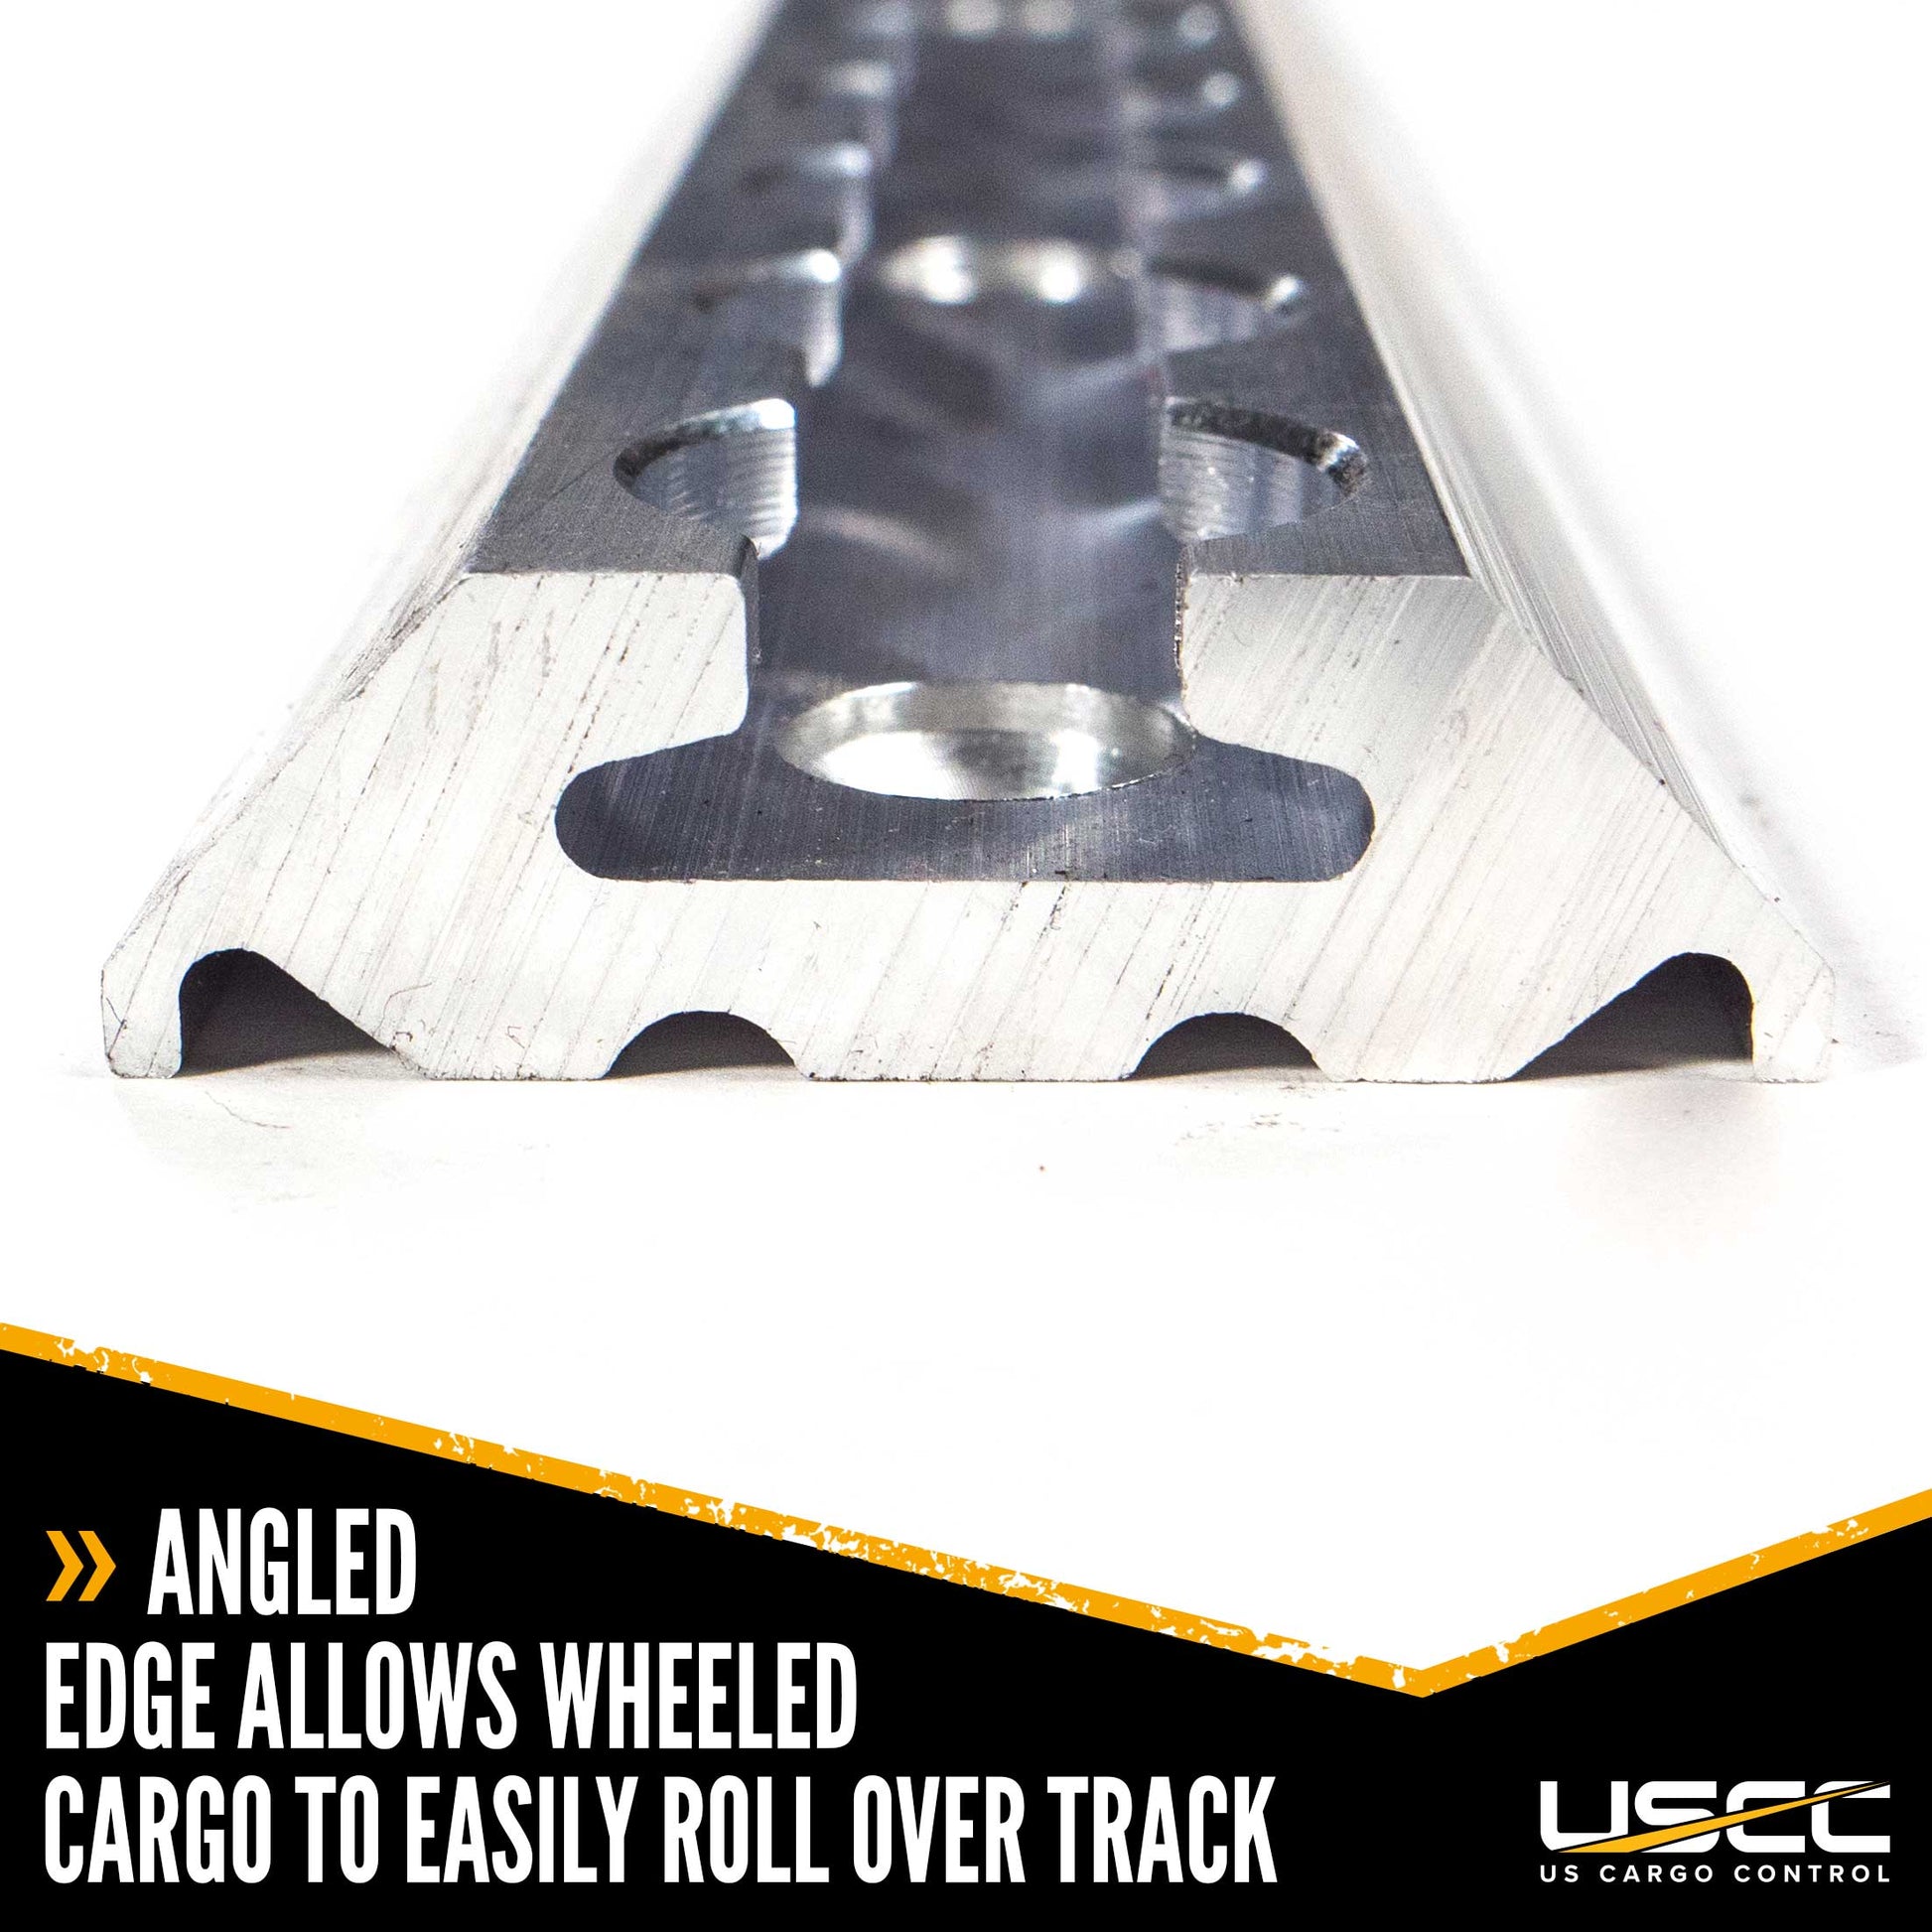 8' angled L-track allows for wheeled cargo to easily roll over the track